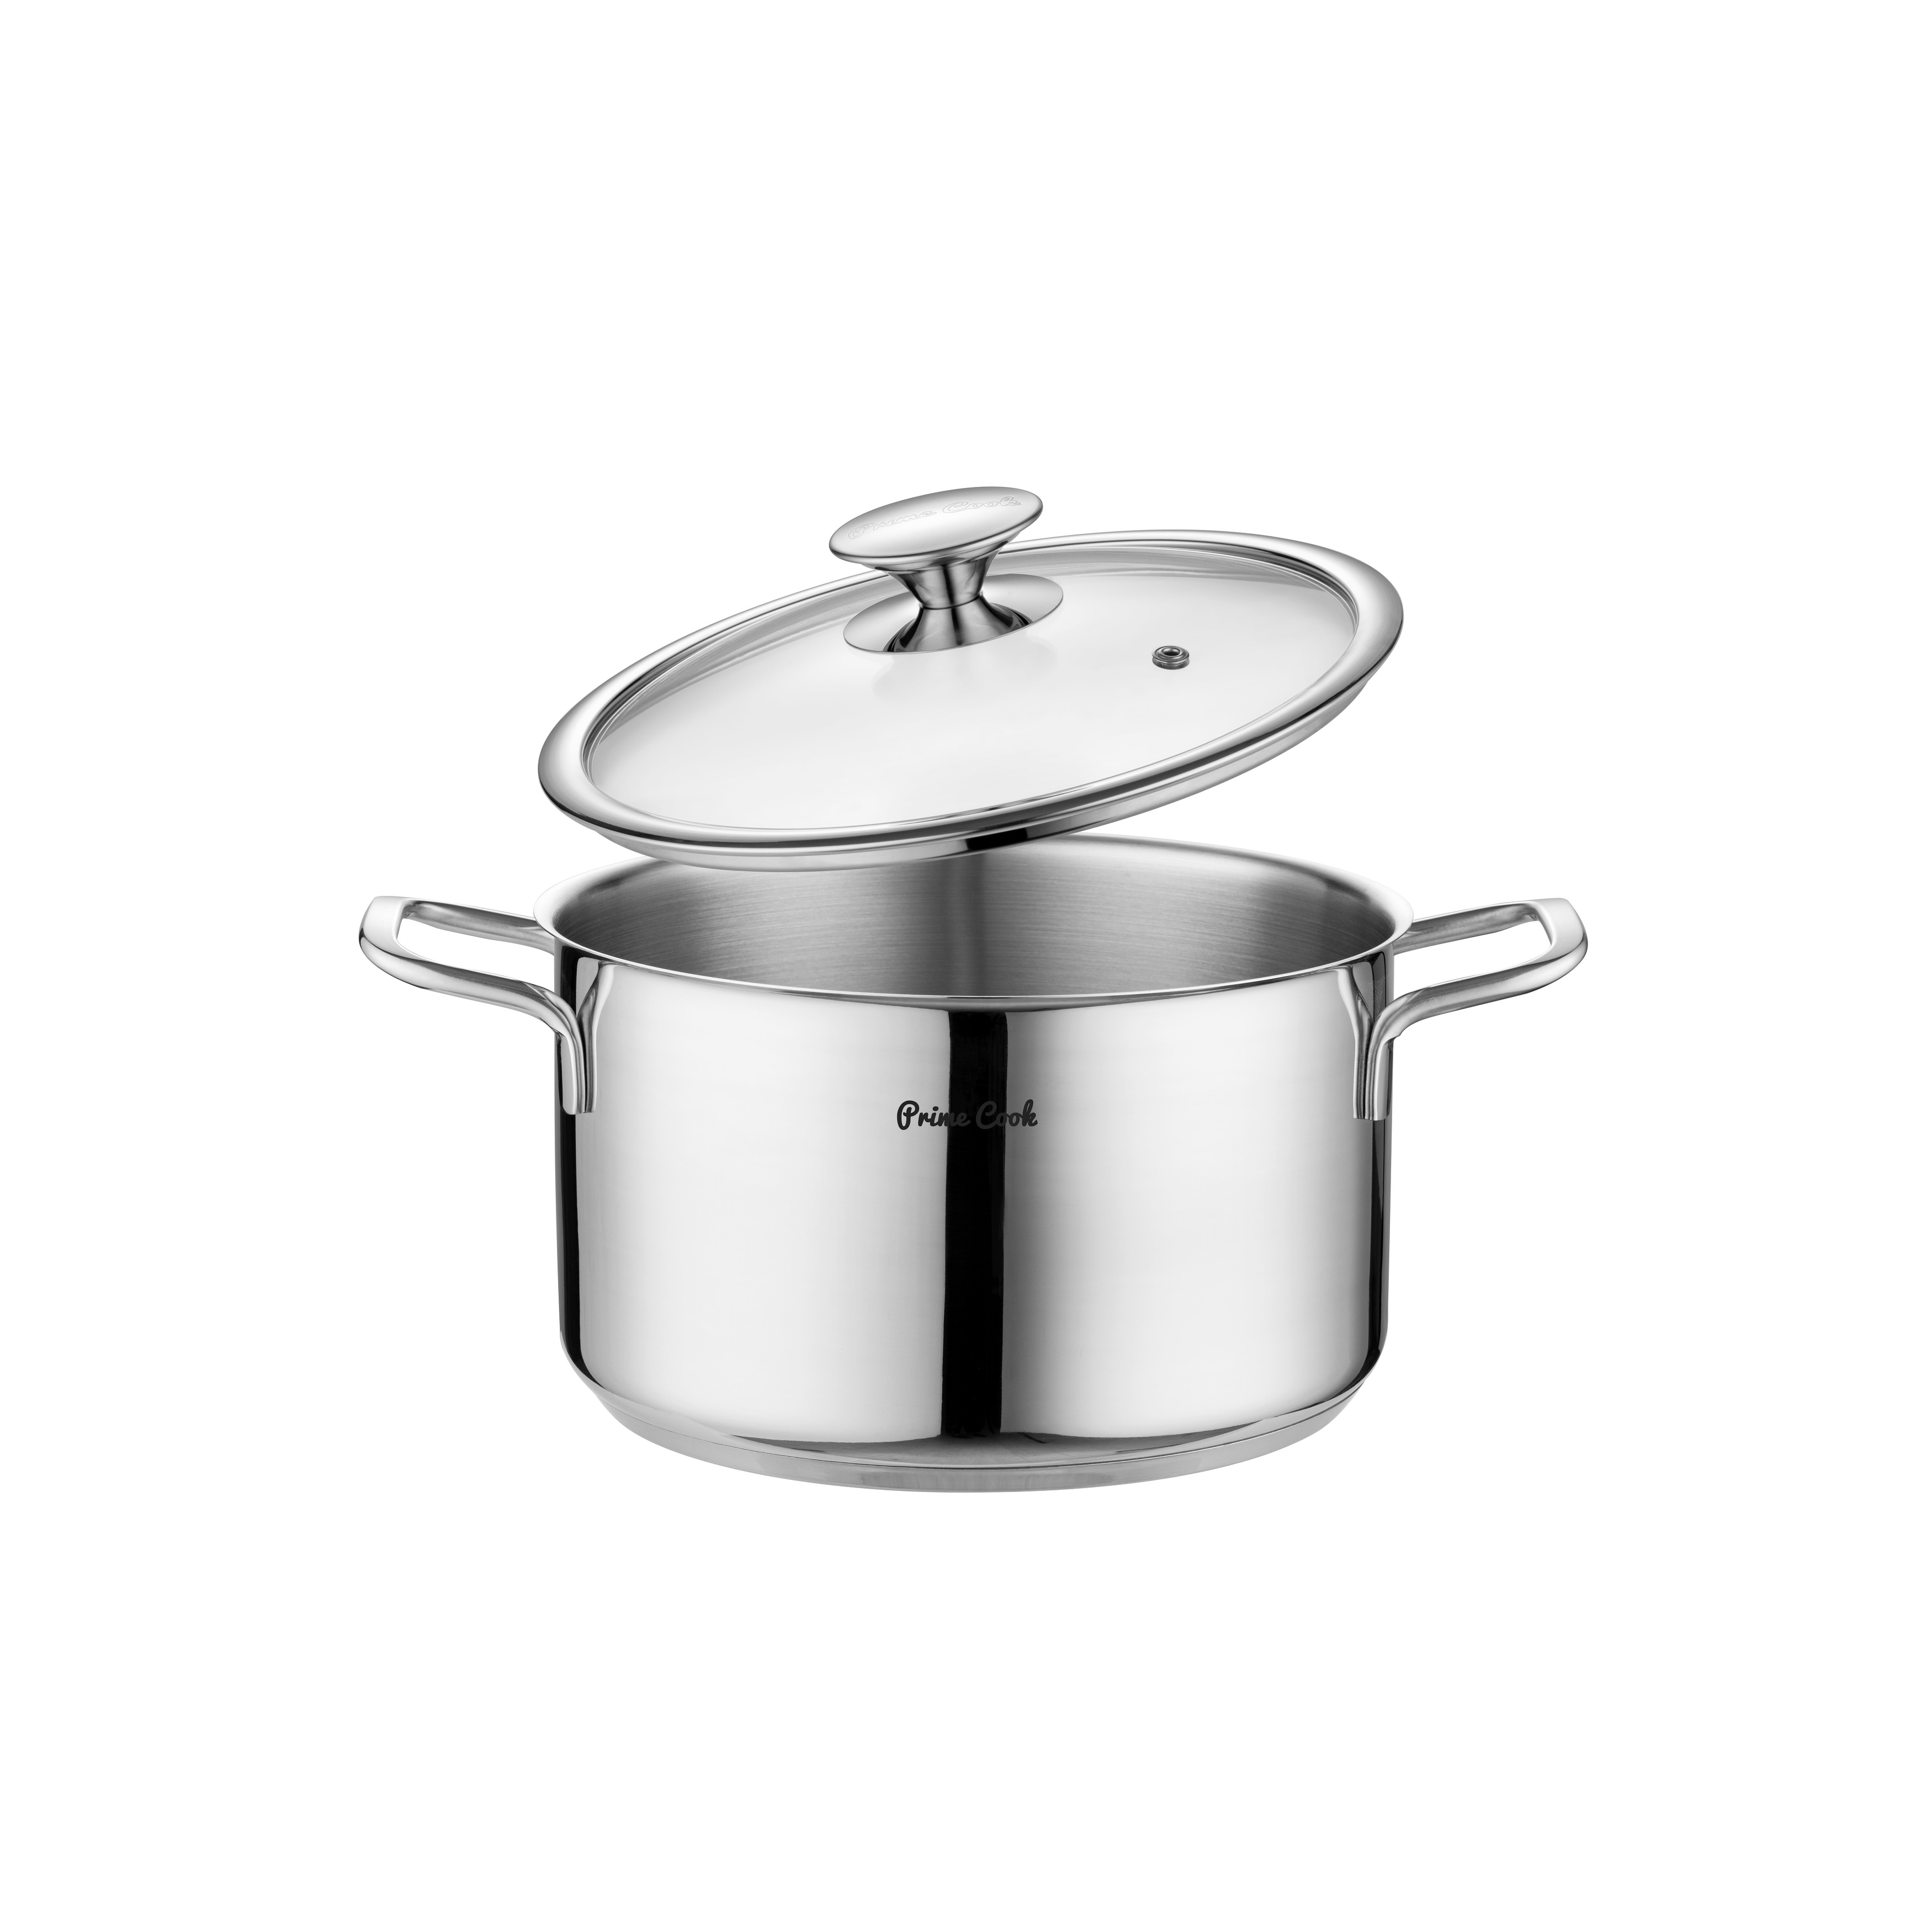 Prime Cook 4 qt. Stainless Steel Soup Pot with Lid WST0220